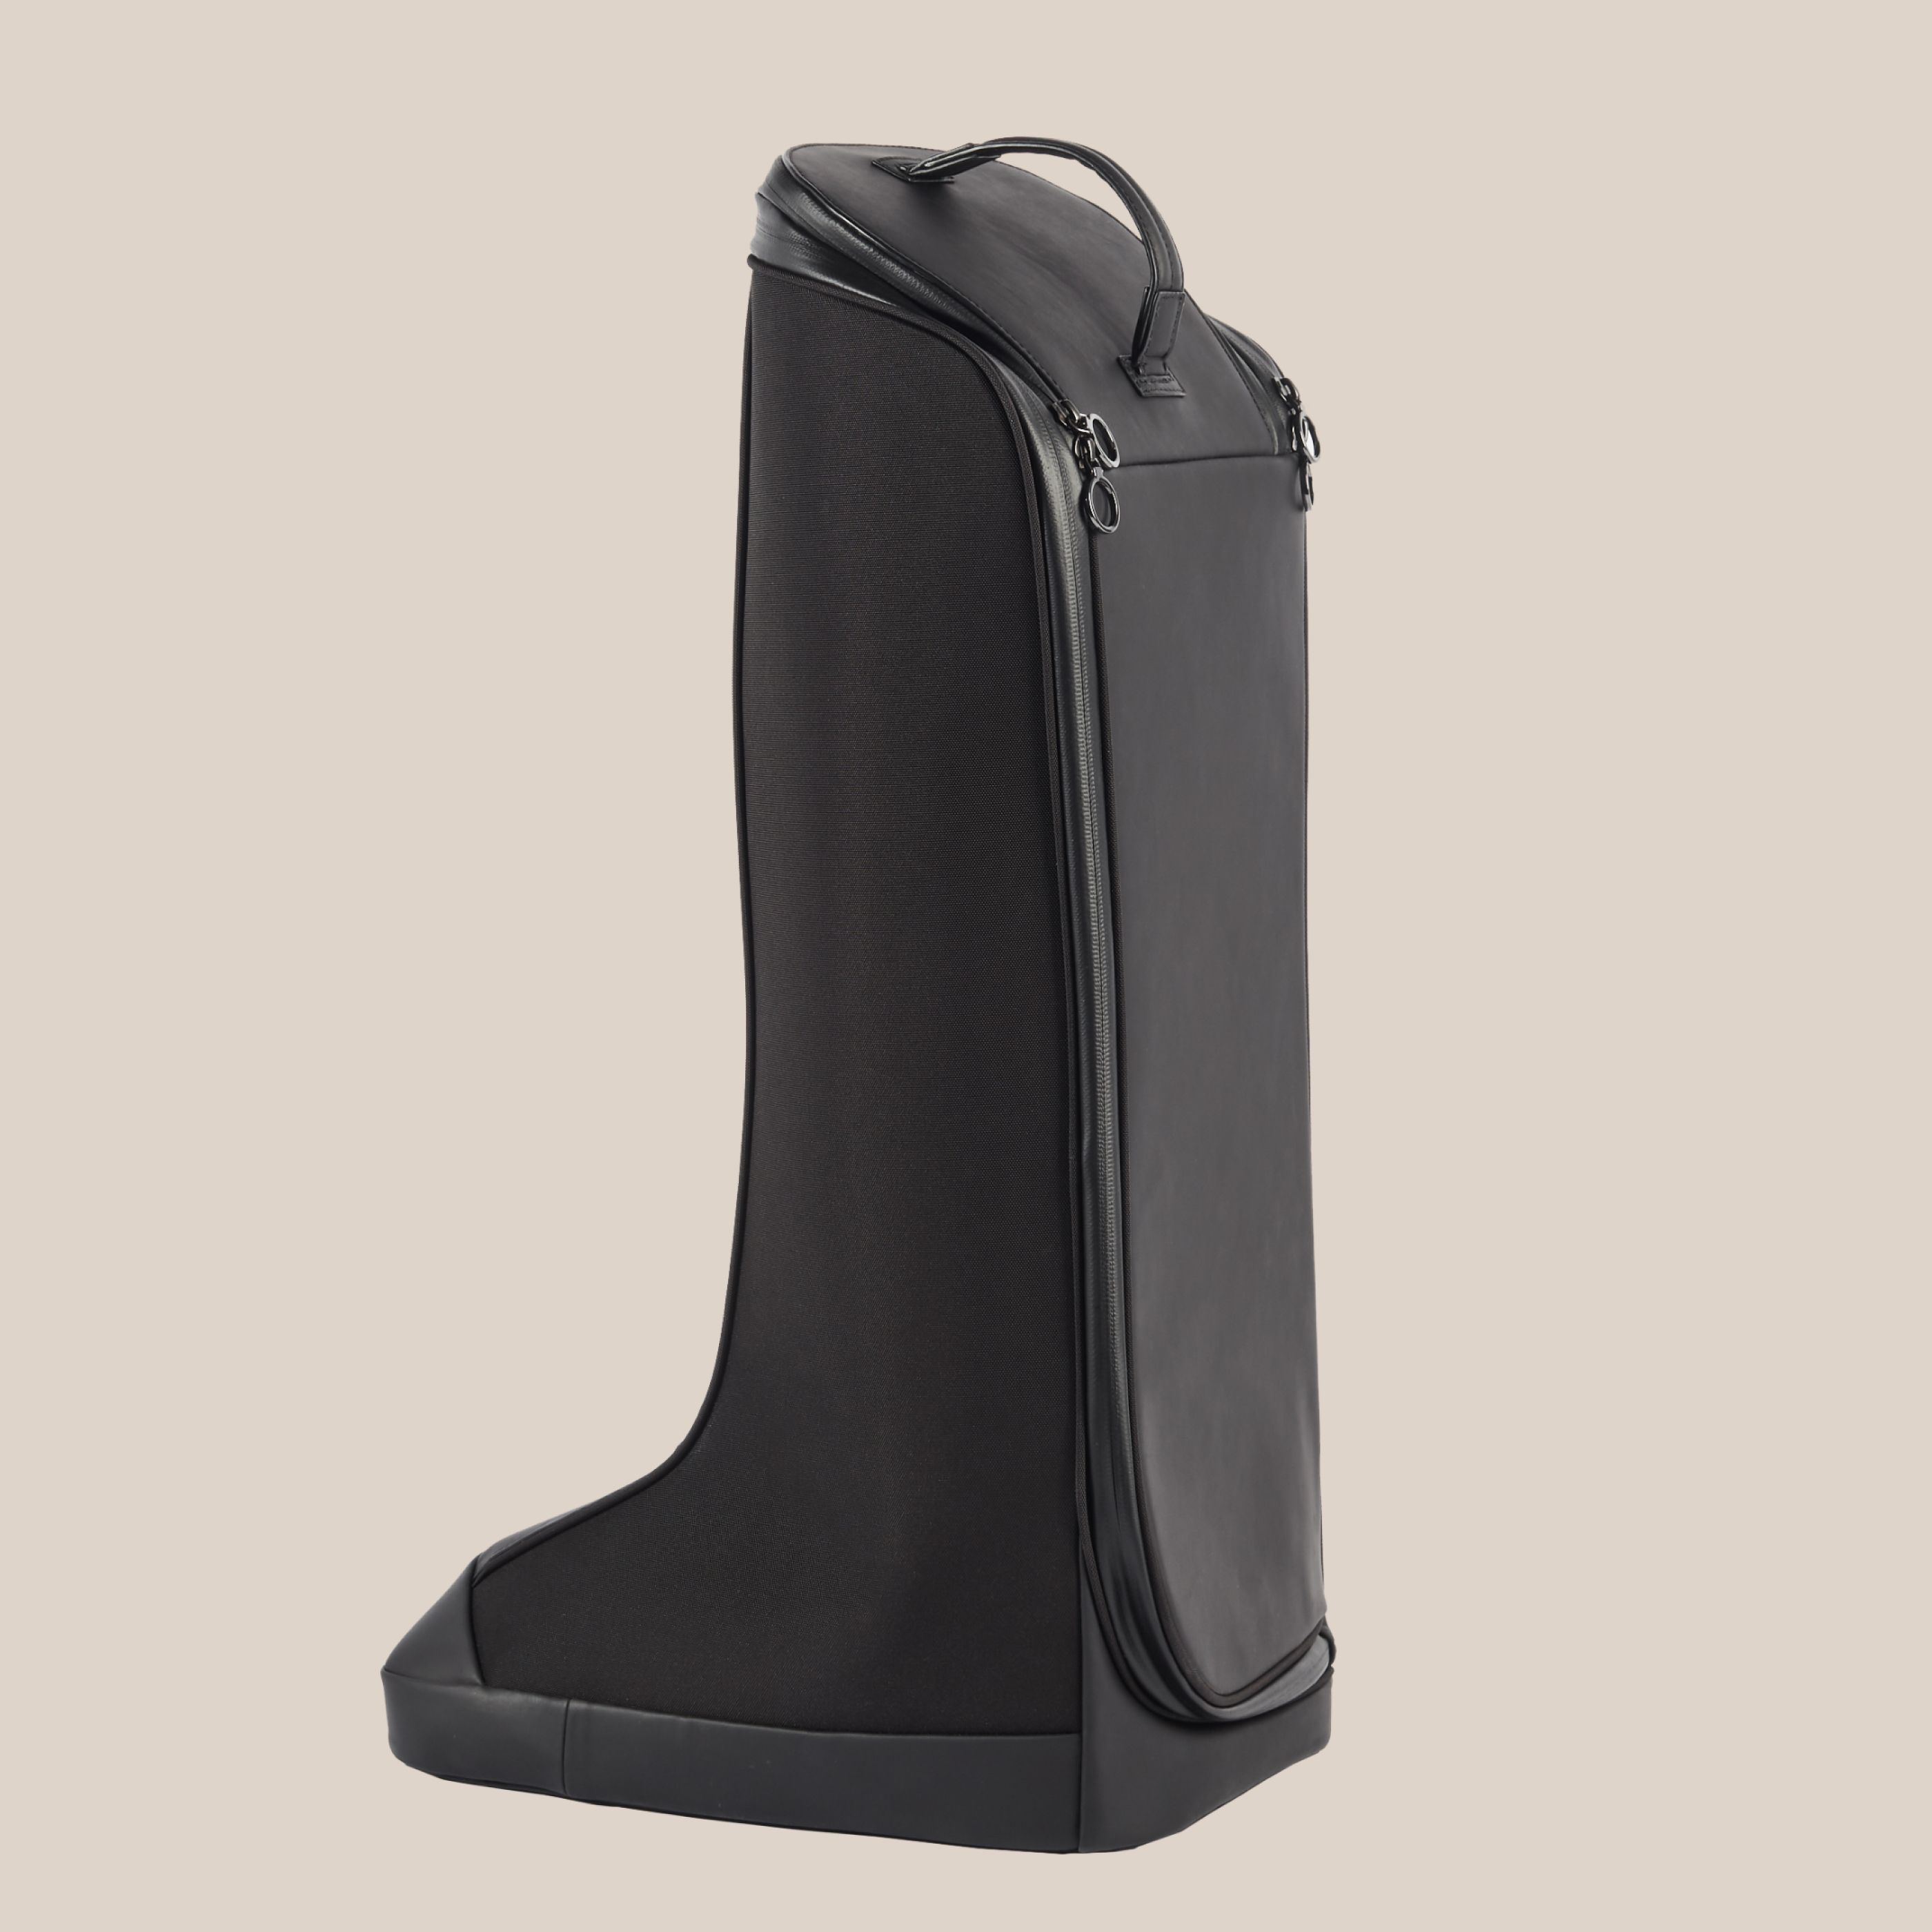 horse riding boot bag in black leather